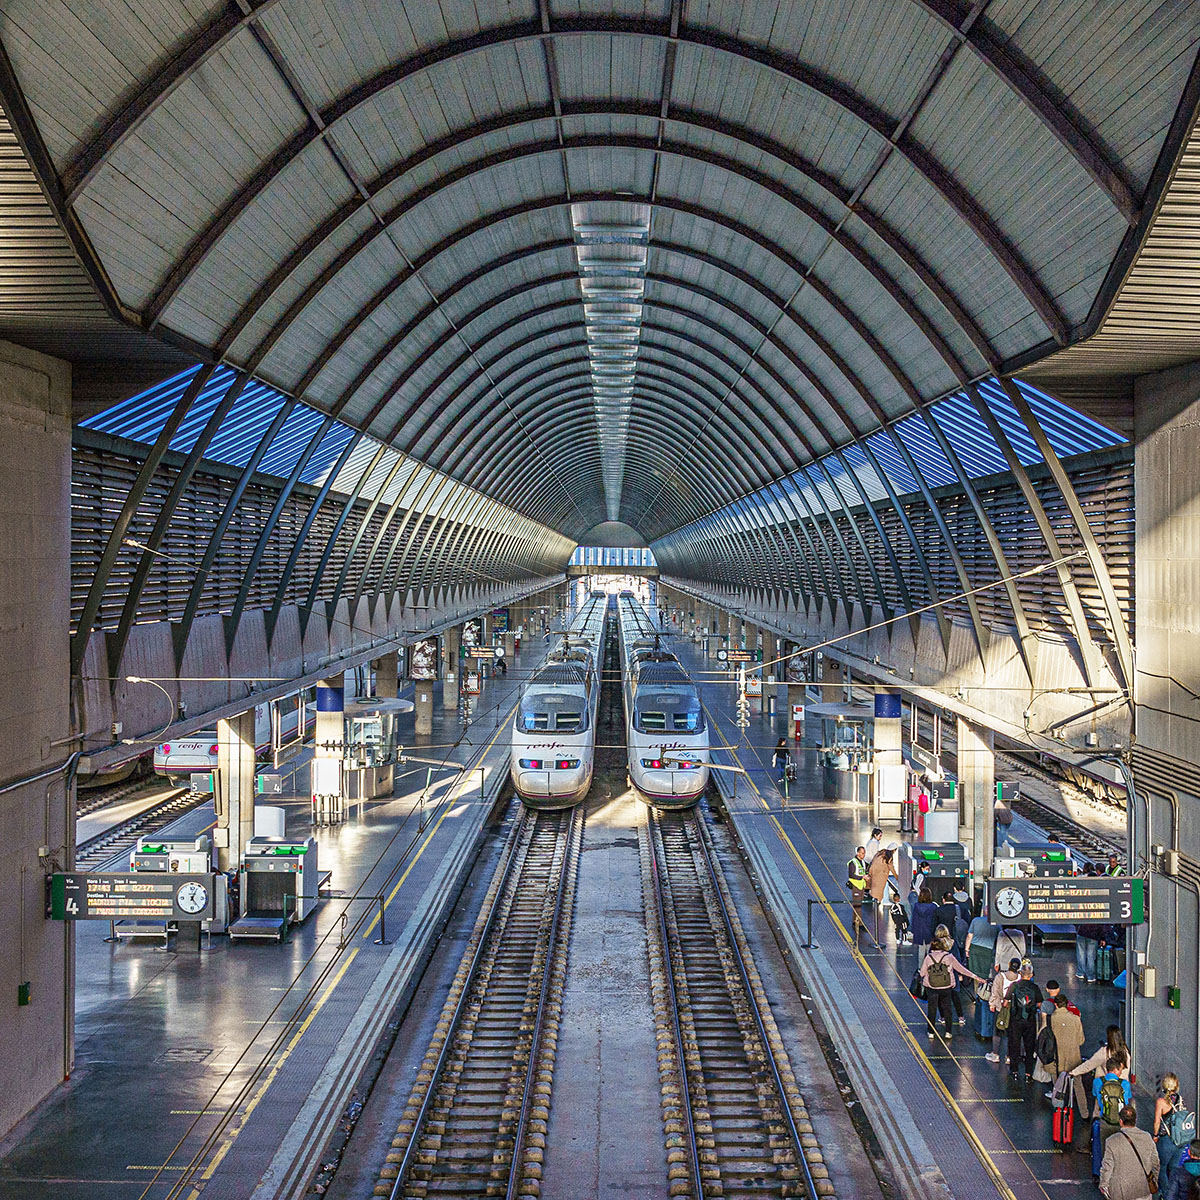 SEVILLE STATION PERSPECTIVE by Malcolm Nabarro